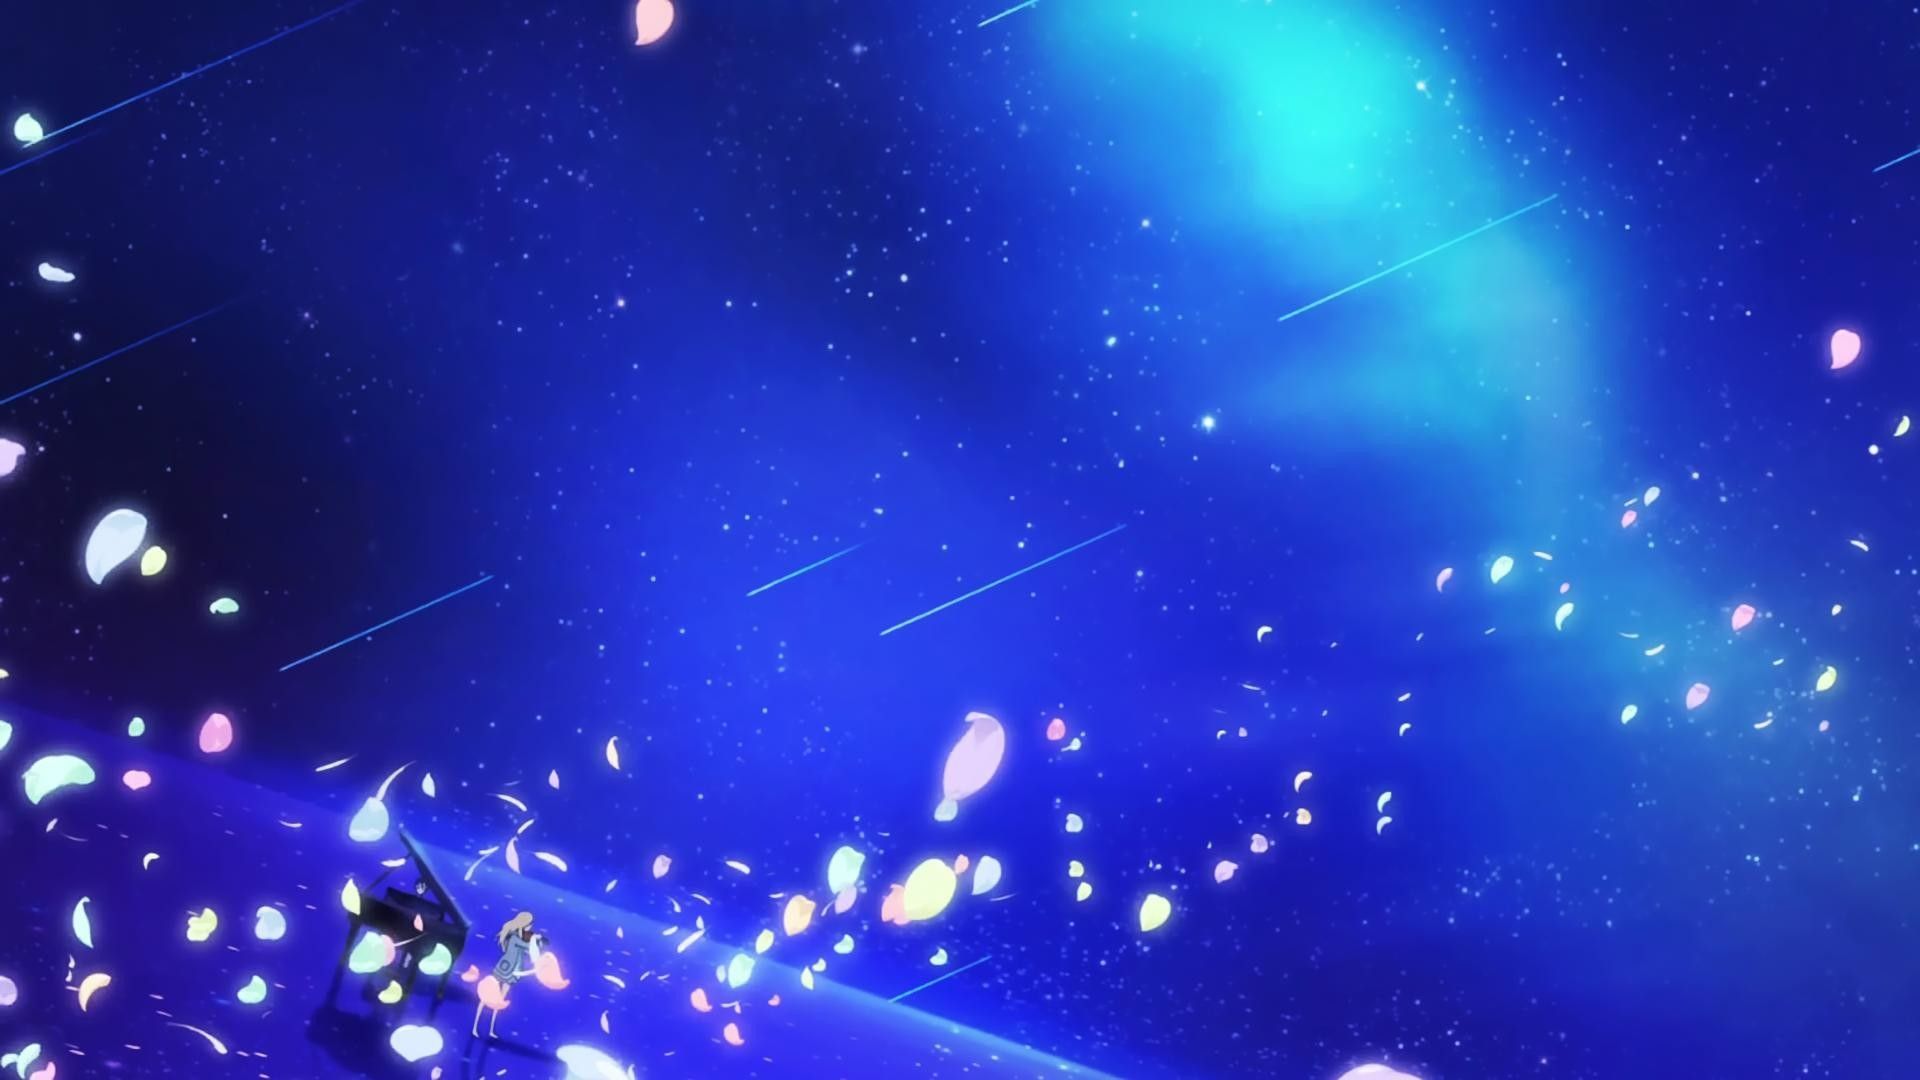 Awesome, Yet Subtle Anime Wallpaper To Hide Your Power Level 1920x1080. Your lie in april, Anime wallpaper, Wallpaper wa